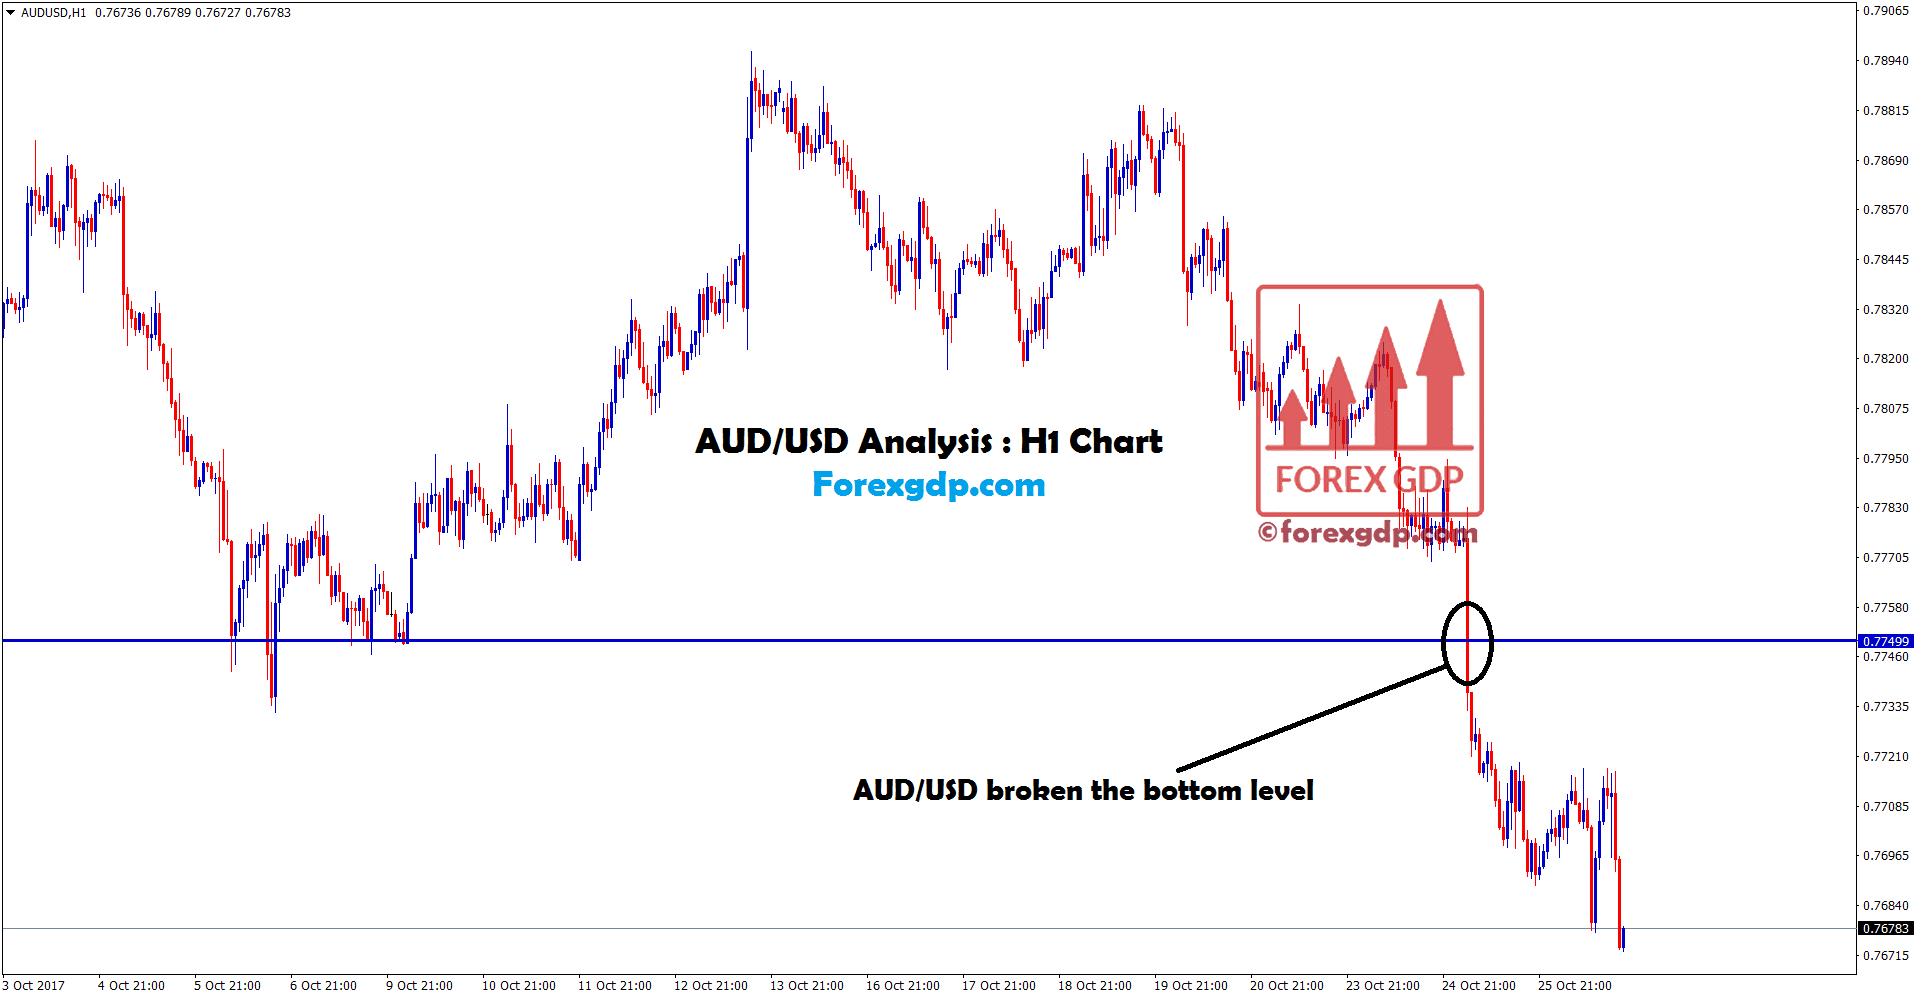 AUDUSD forex signals providers at the breakout